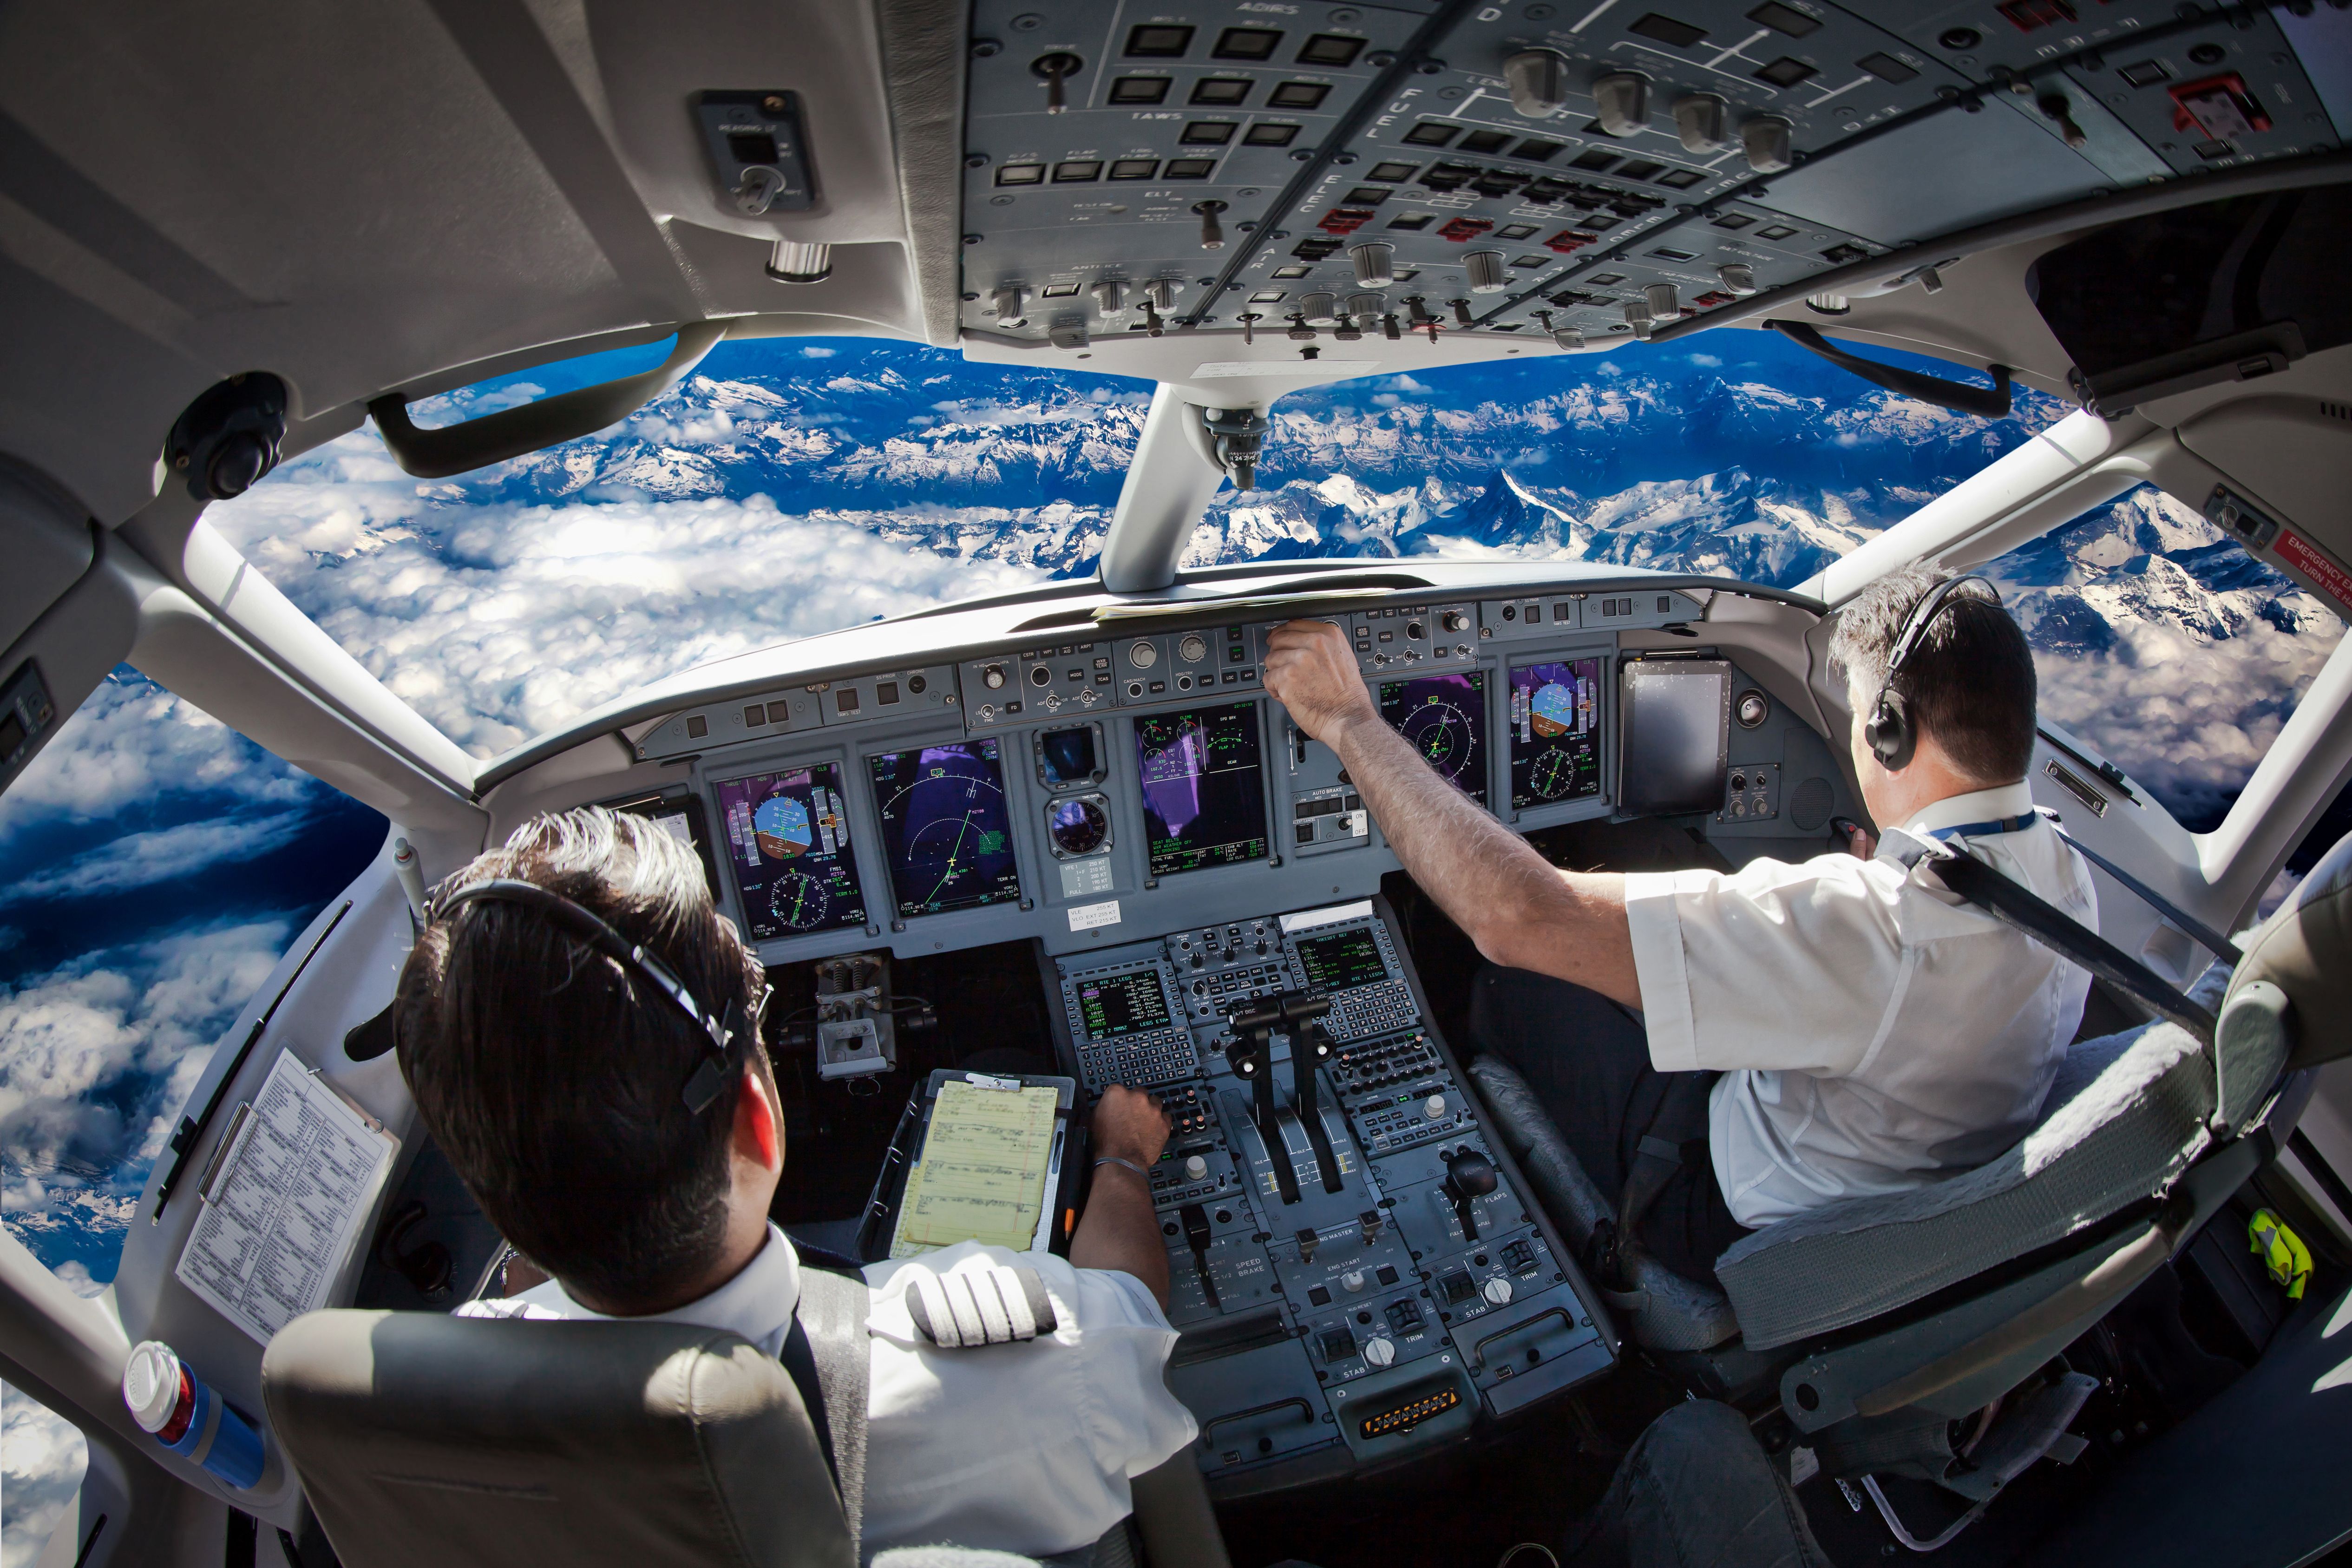 Two pilots working in an airplane cockpit.